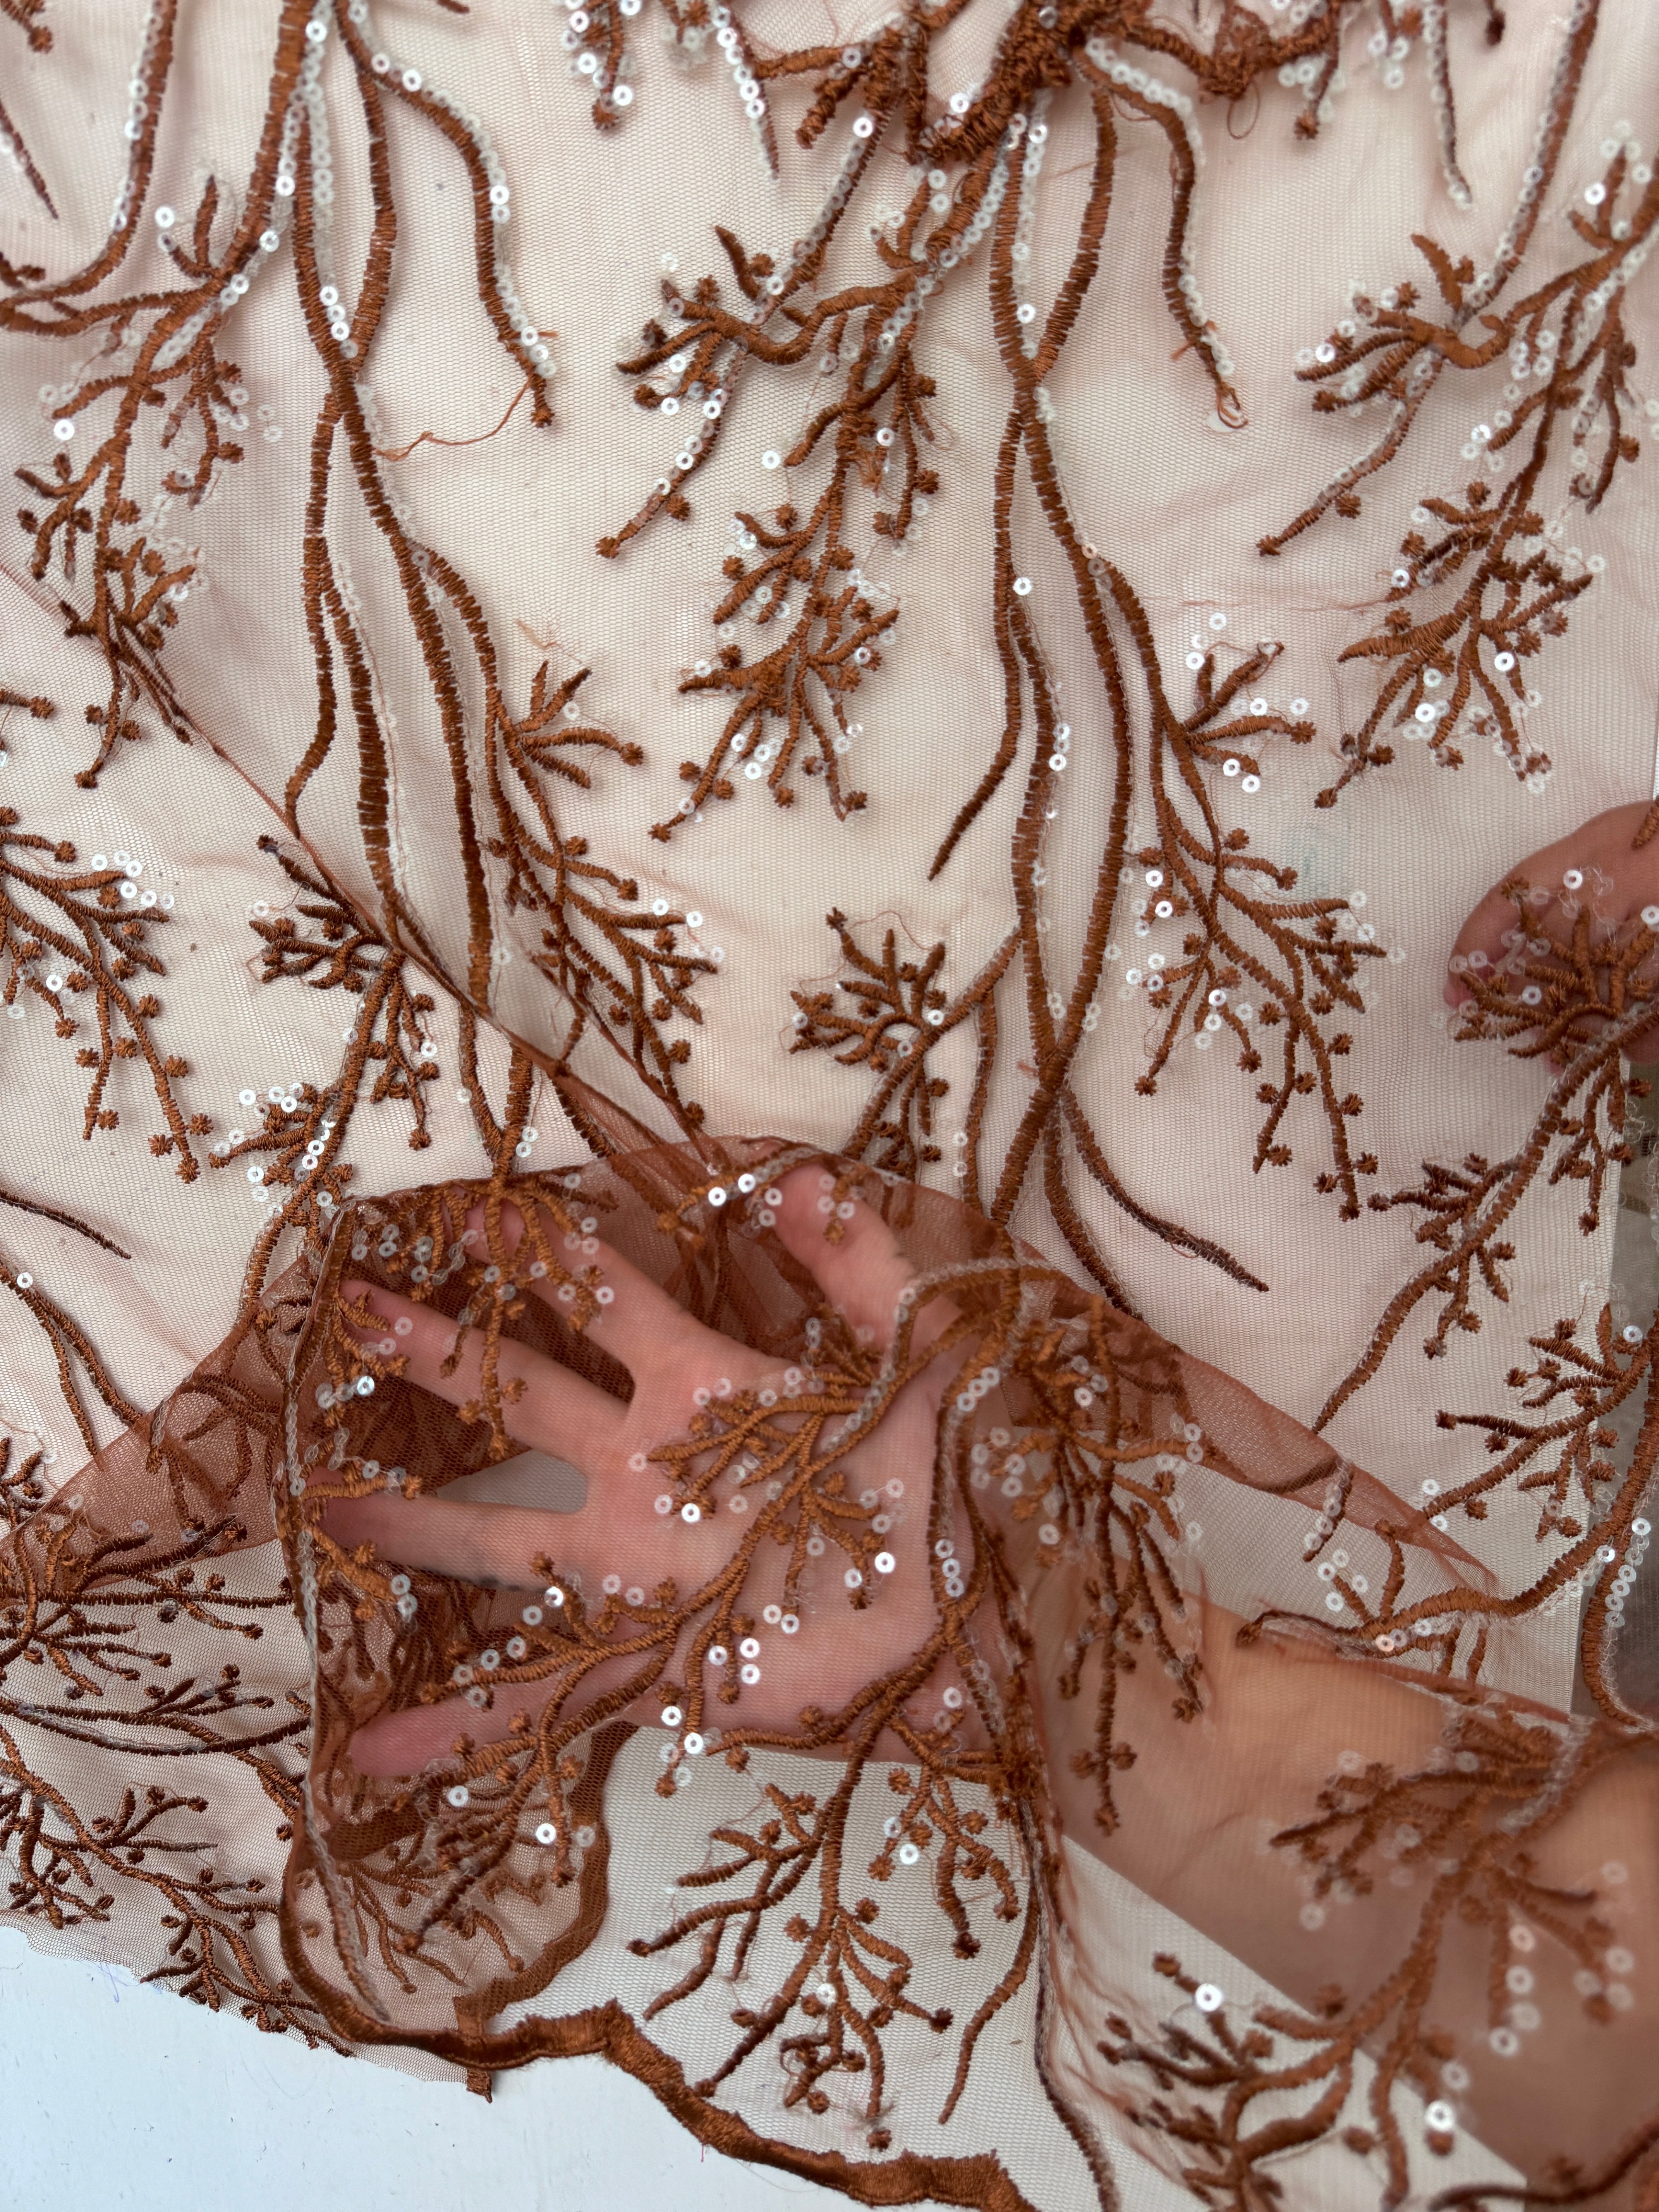 Caramel Embroidered Scalloped Branch Lace, brown Embroidered Scalloped Branch Lace, light brown Embroidered Scalloped Branch Lace, dark brown Embroidered Scalloped Branch Lace, Embroidered Scalloped Branch Lace for woman, Embroidered Scalloped Branch Lace for bride, Embroidered Scalloped Branch Lace on discount